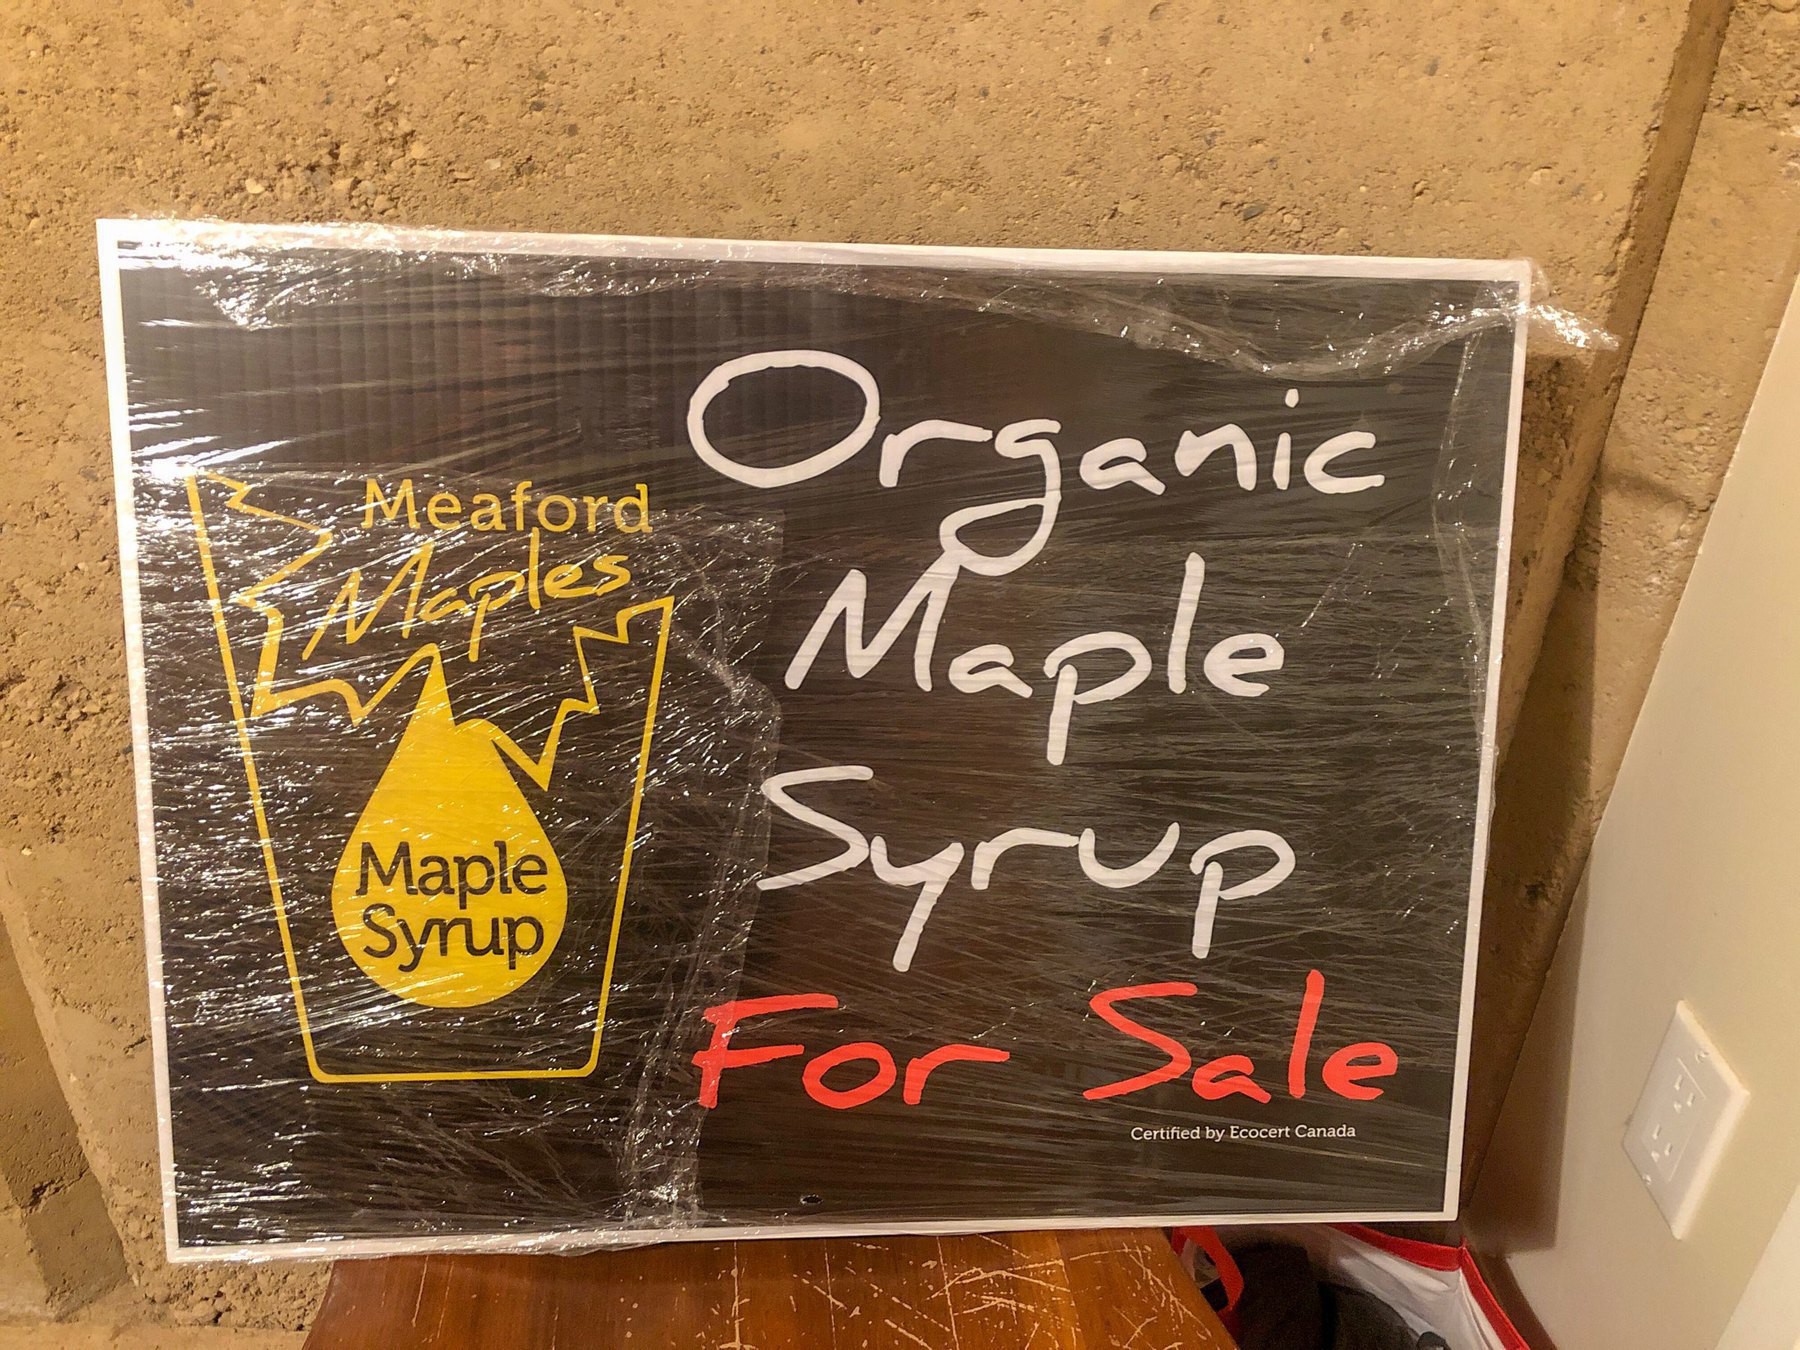 meaford maples organic maple syrup for sale. certified by ecocert canada